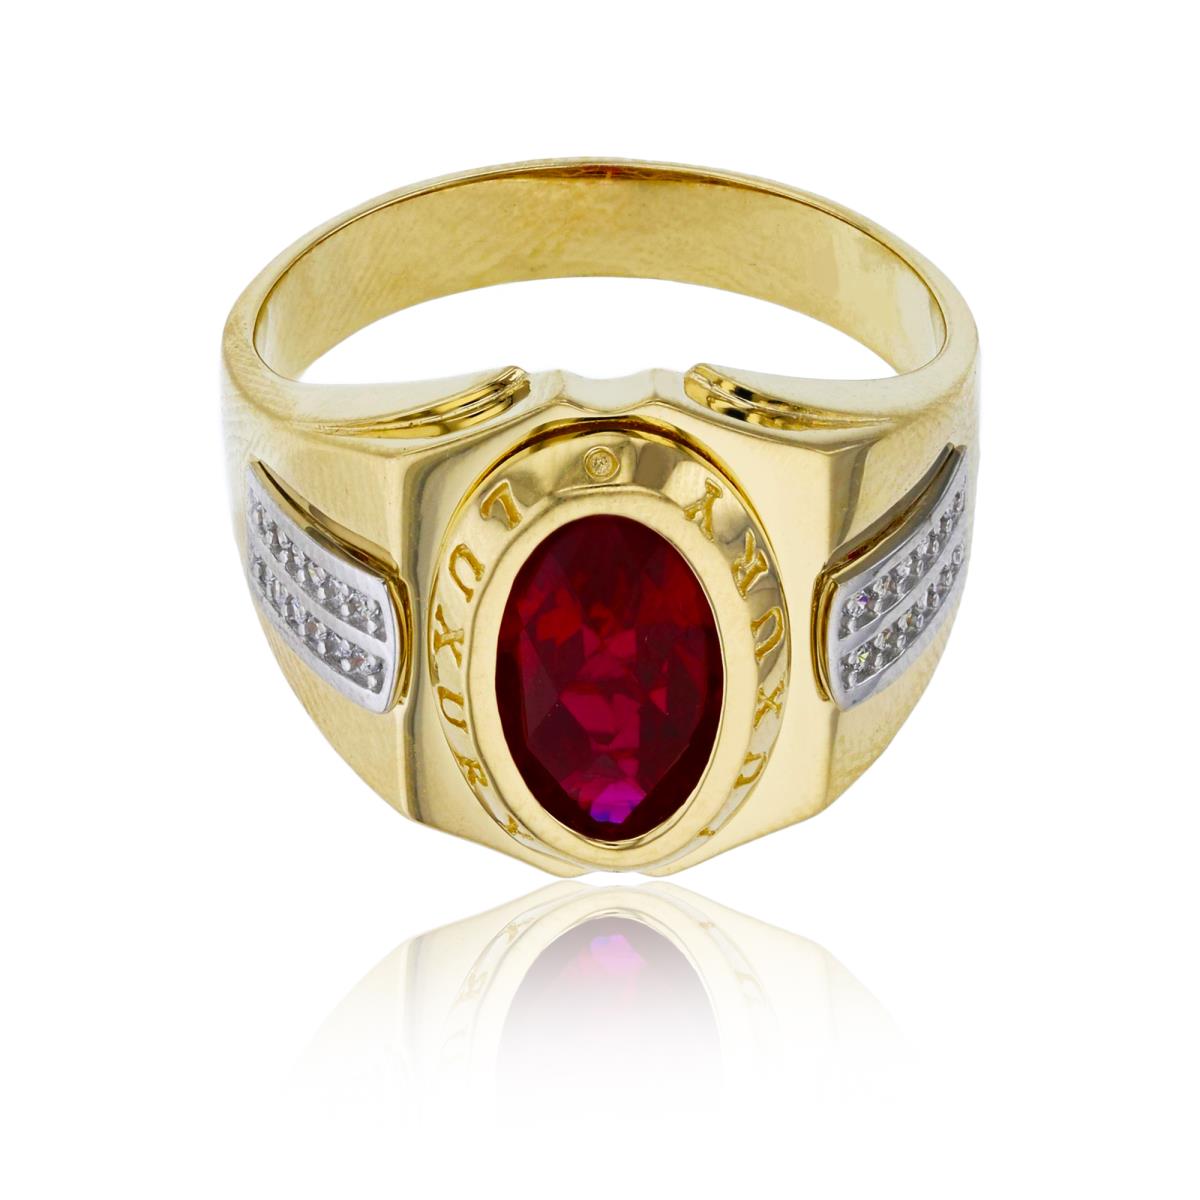 14K Gold Yellow & White Gold 12x8mm Oval Ruby 18mm Ring